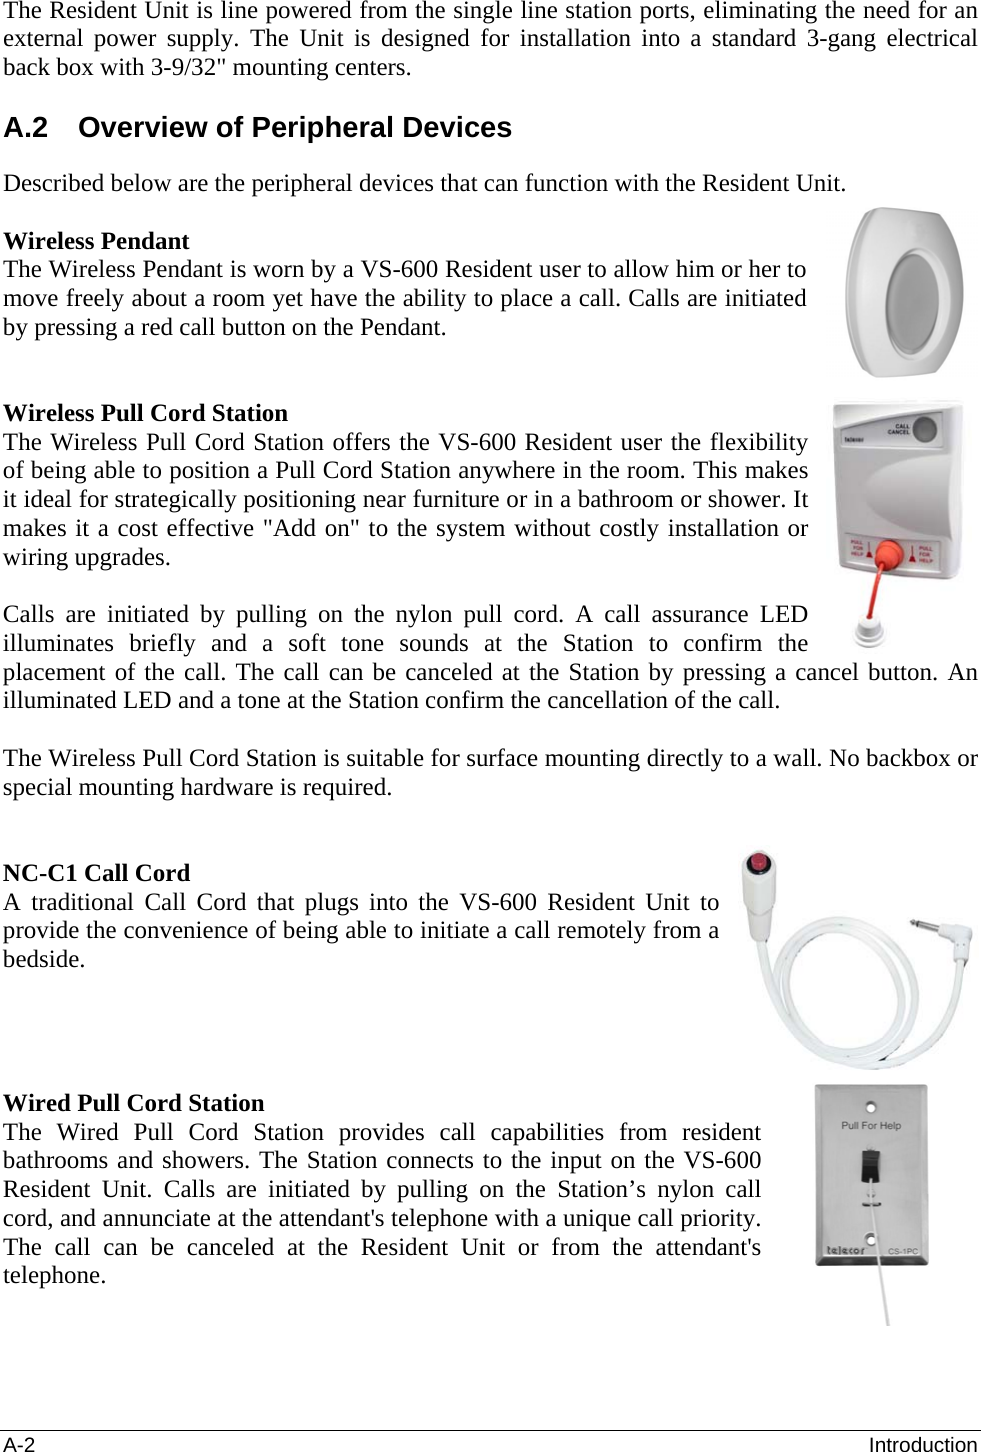 A-2  Introduction The Resident Unit is line powered from the single line station ports, eliminating the need for an external power supply. The Unit is designed for installation into a standard 3-gang electrical back box with 3-9/32&quot; mounting centers.   A.2  Overview of Peripheral Devices Described below are the peripheral devices that can function with the Resident Unit.  Wireless Pendant The Wireless Pendant is worn by a VS-600 Resident user to allow him or her to move freely about a room yet have the ability to place a call. Calls are initiated by pressing a red call button on the Pendant.   Wireless Pull Cord Station The Wireless Pull Cord Station offers the VS-600 Resident user the flexibility of being able to position a Pull Cord Station anywhere in the room. This makes it ideal for strategically positioning near furniture or in a bathroom or shower. It makes it a cost effective &quot;Add on&quot; to the system without costly installation or wiring upgrades.   Calls are initiated by pulling on the nylon pull cord. A call assurance LED illuminates briefly and a soft tone sounds at the Station to confirm the placement of the call. The call can be canceled at the Station by pressing a cancel button. An illuminated LED and a tone at the Station confirm the cancellation of the call.   The Wireless Pull Cord Station is suitable for surface mounting directly to a wall. No backbox or special mounting hardware is required.    NC-C1 Call Cord A traditional Call Cord that plugs into the VS-600 Resident Unit to provide the convenience of being able to initiate a call remotely from a bedside.       Wired Pull Cord Station The Wired Pull Cord Station provides call capabilities from resident bathrooms and showers. The Station connects to the input on the VS-600 Resident Unit. Calls are initiated by pulling on the Station’s nylon call cord, and annunciate at the attendant&apos;s telephone with a unique call priority. The call can be canceled at the Resident Unit or from the attendant&apos;s telephone.     